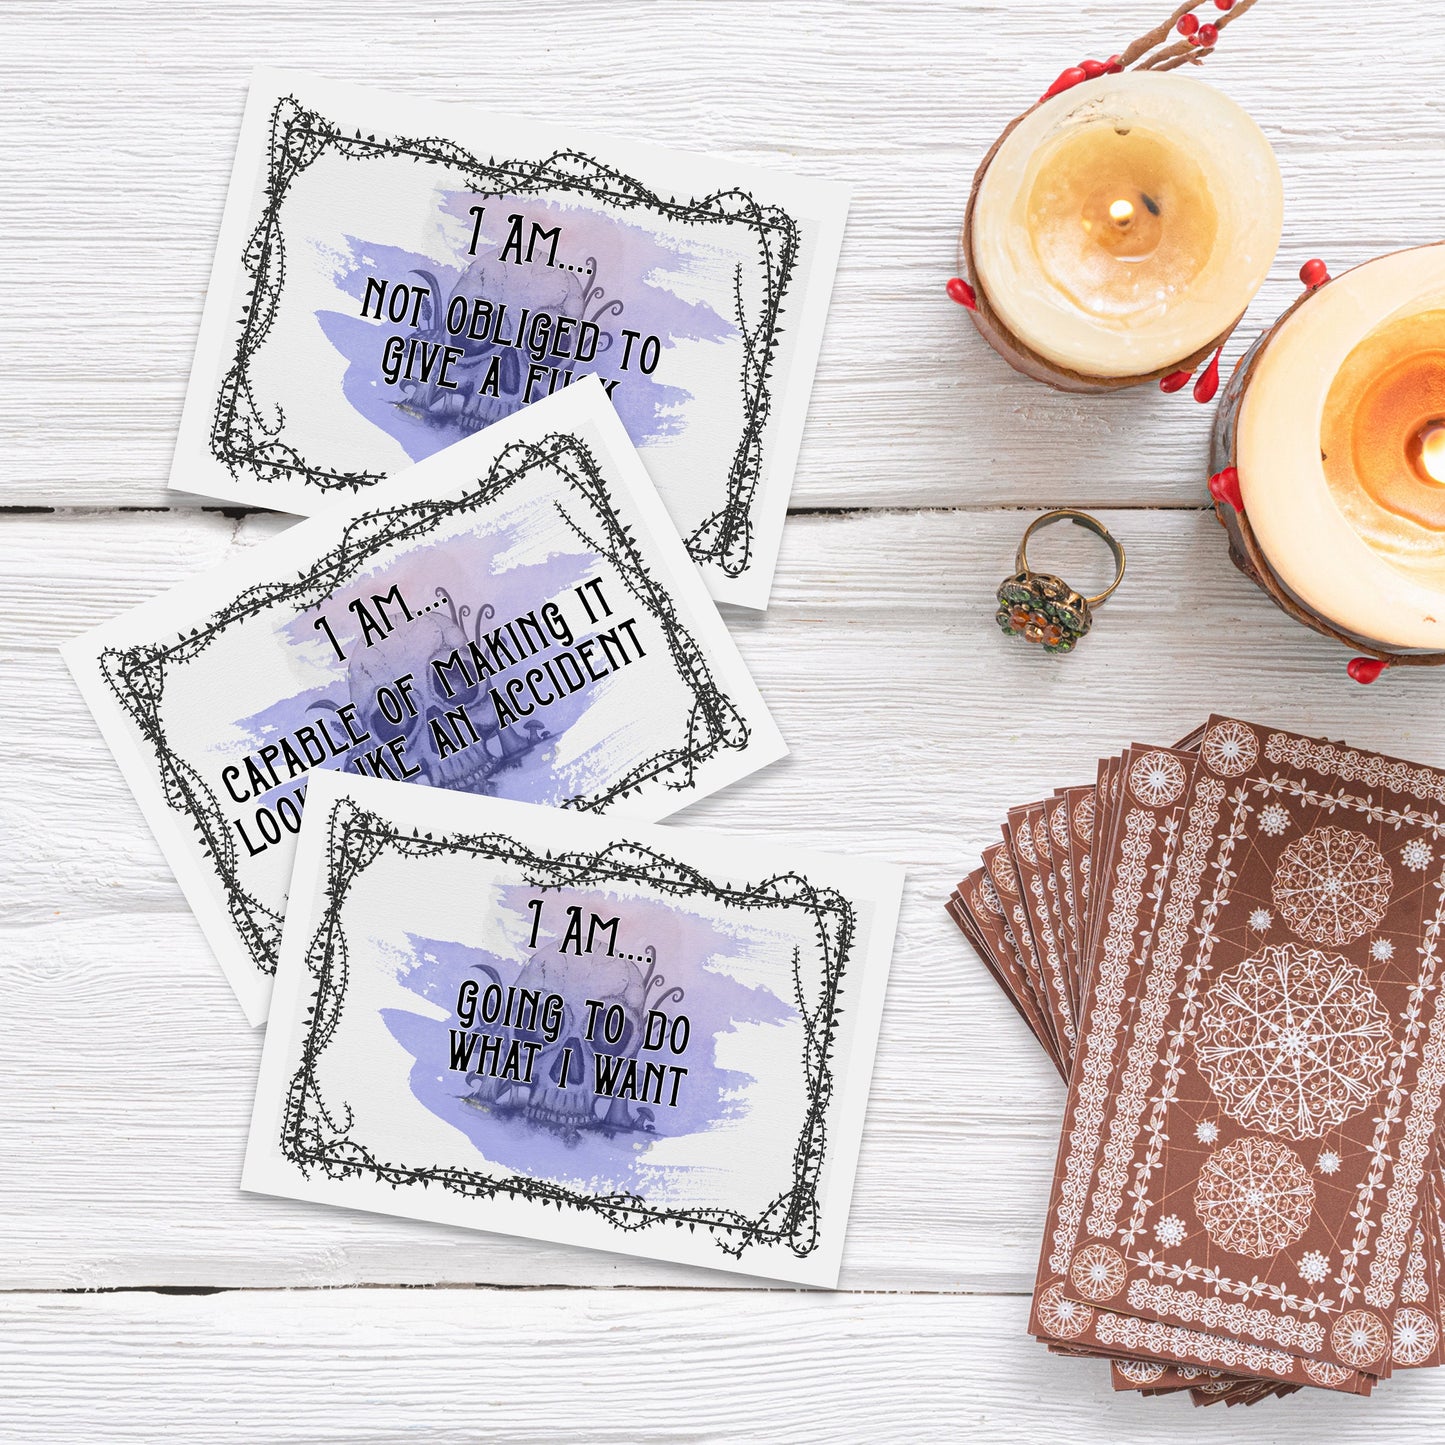 The Sweary Affirmation Shop - Mini Sweary Affirmation Deck | Funny Encouragement Cards | Pocket Sized Sweary Positivity Affirmation Deck | Gender Neutral